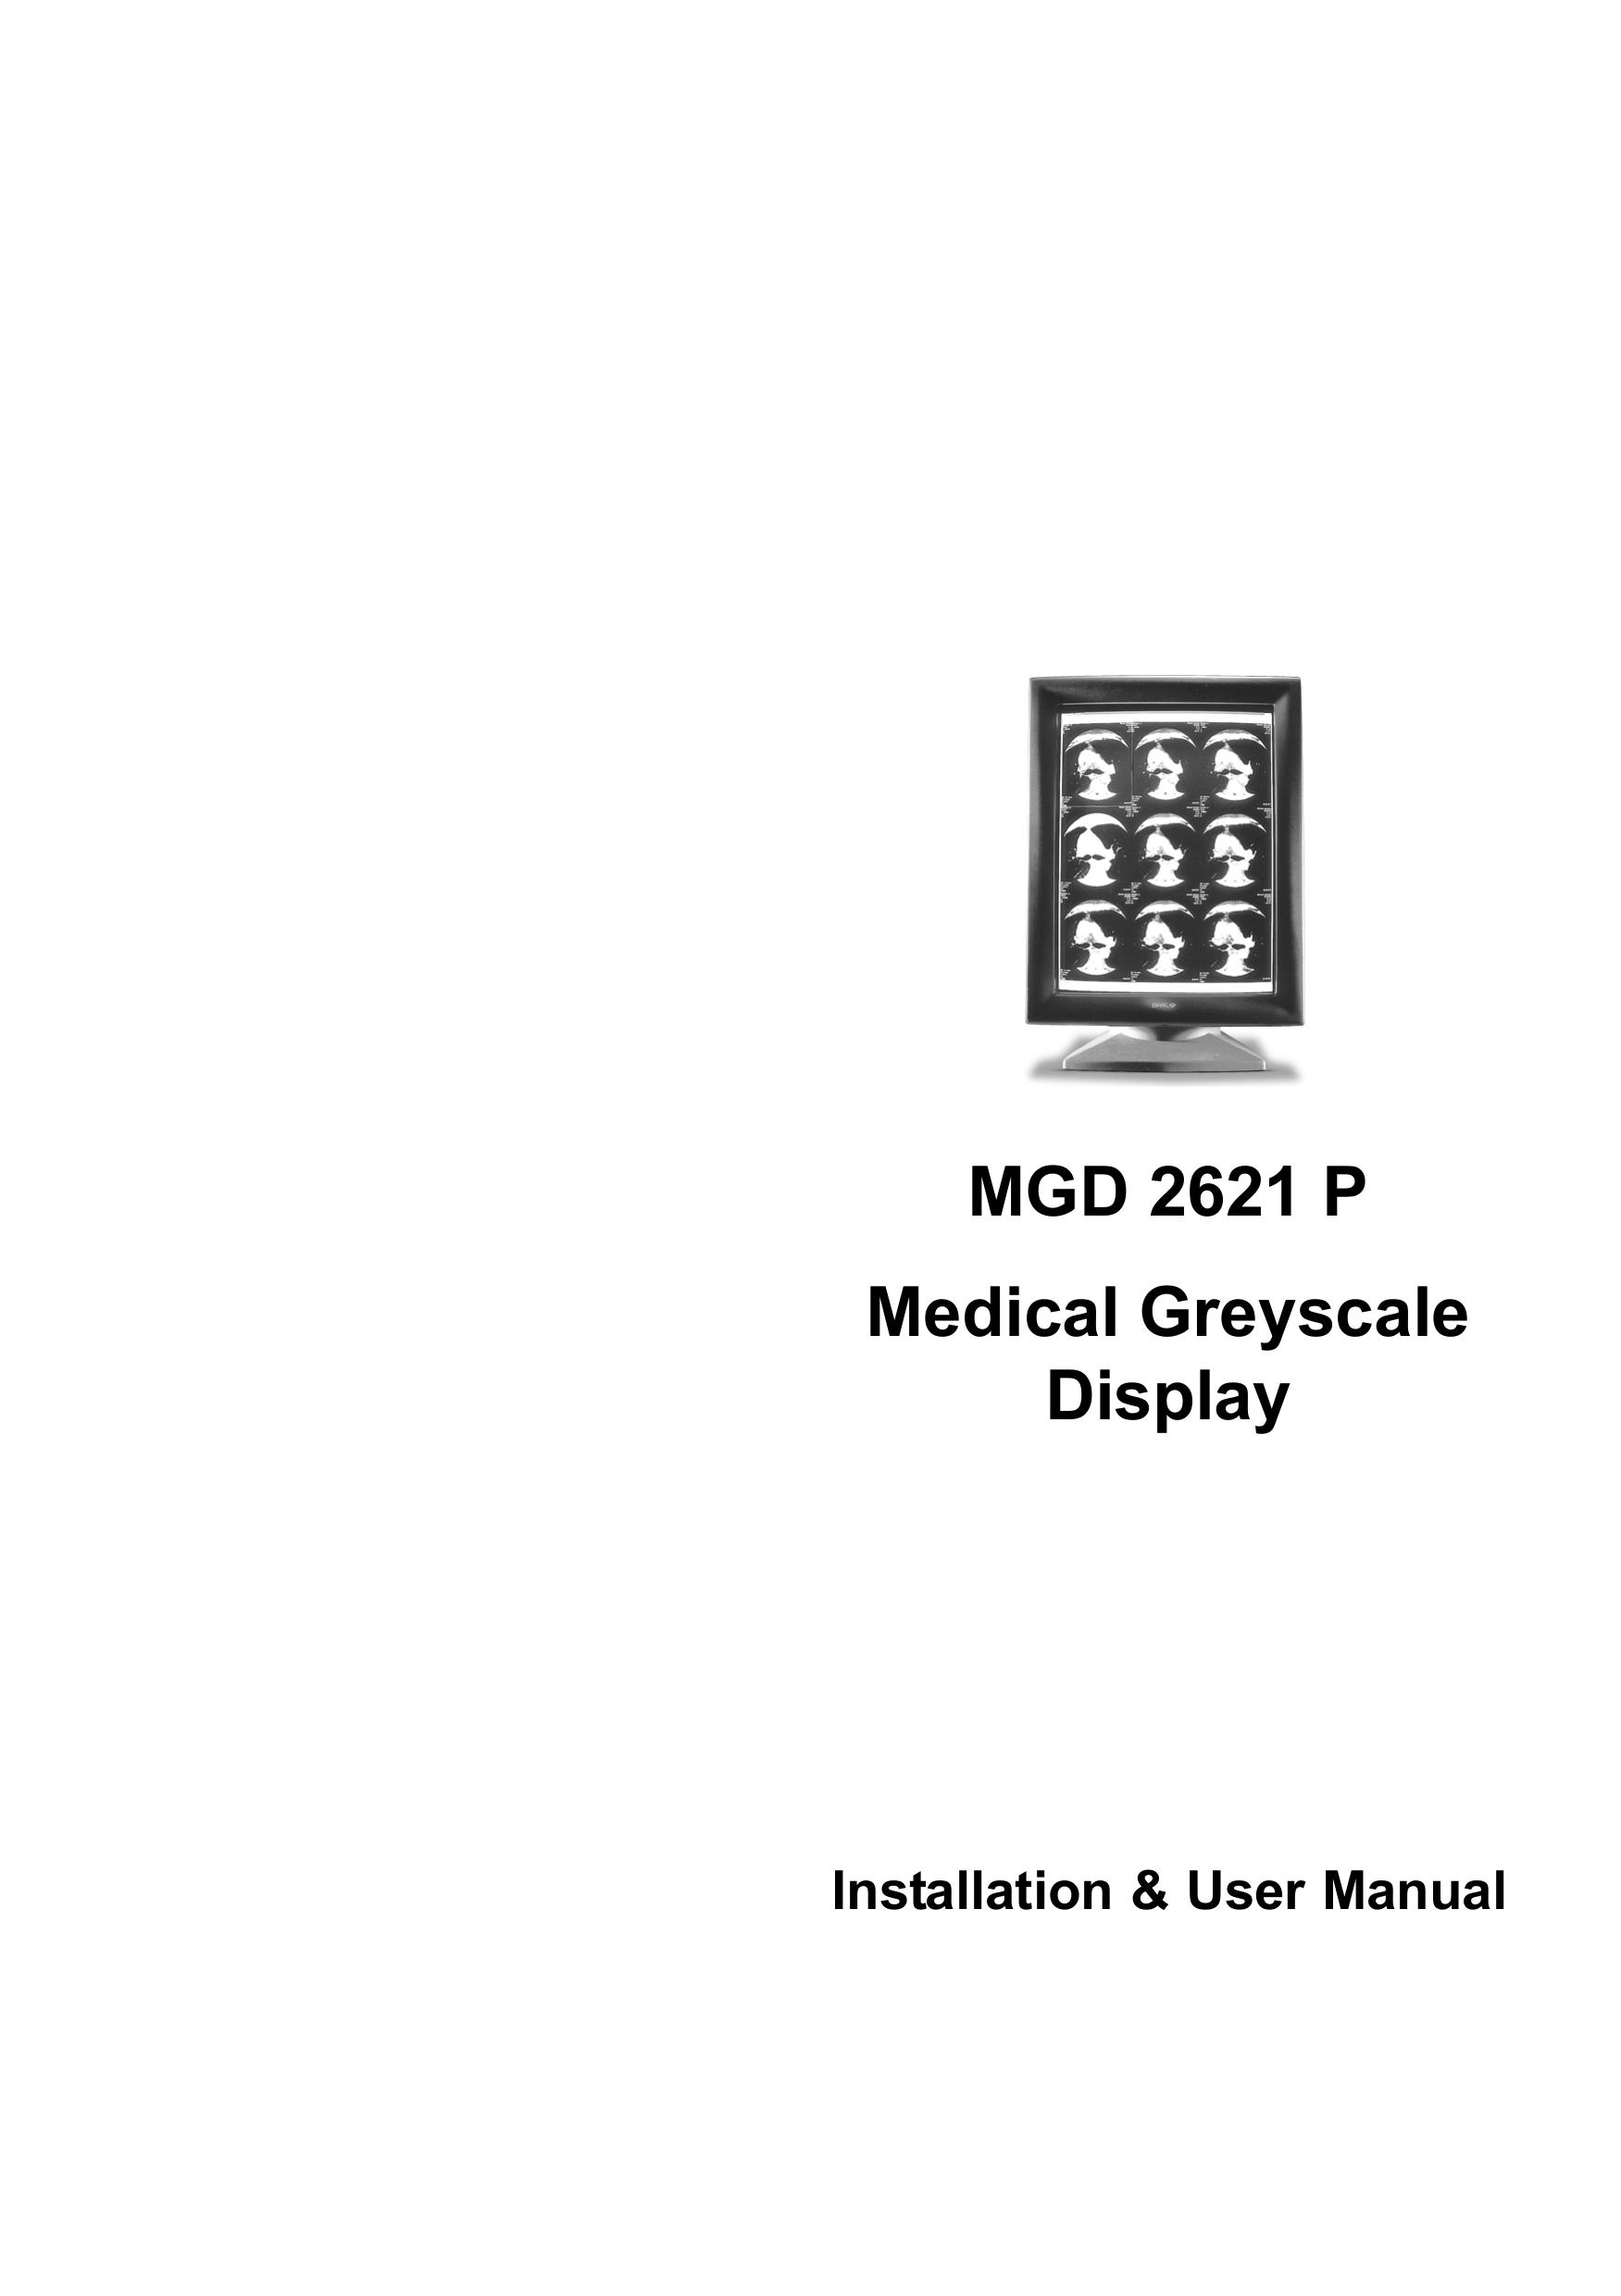 Barco MGD 2621 Thermometer User Manual